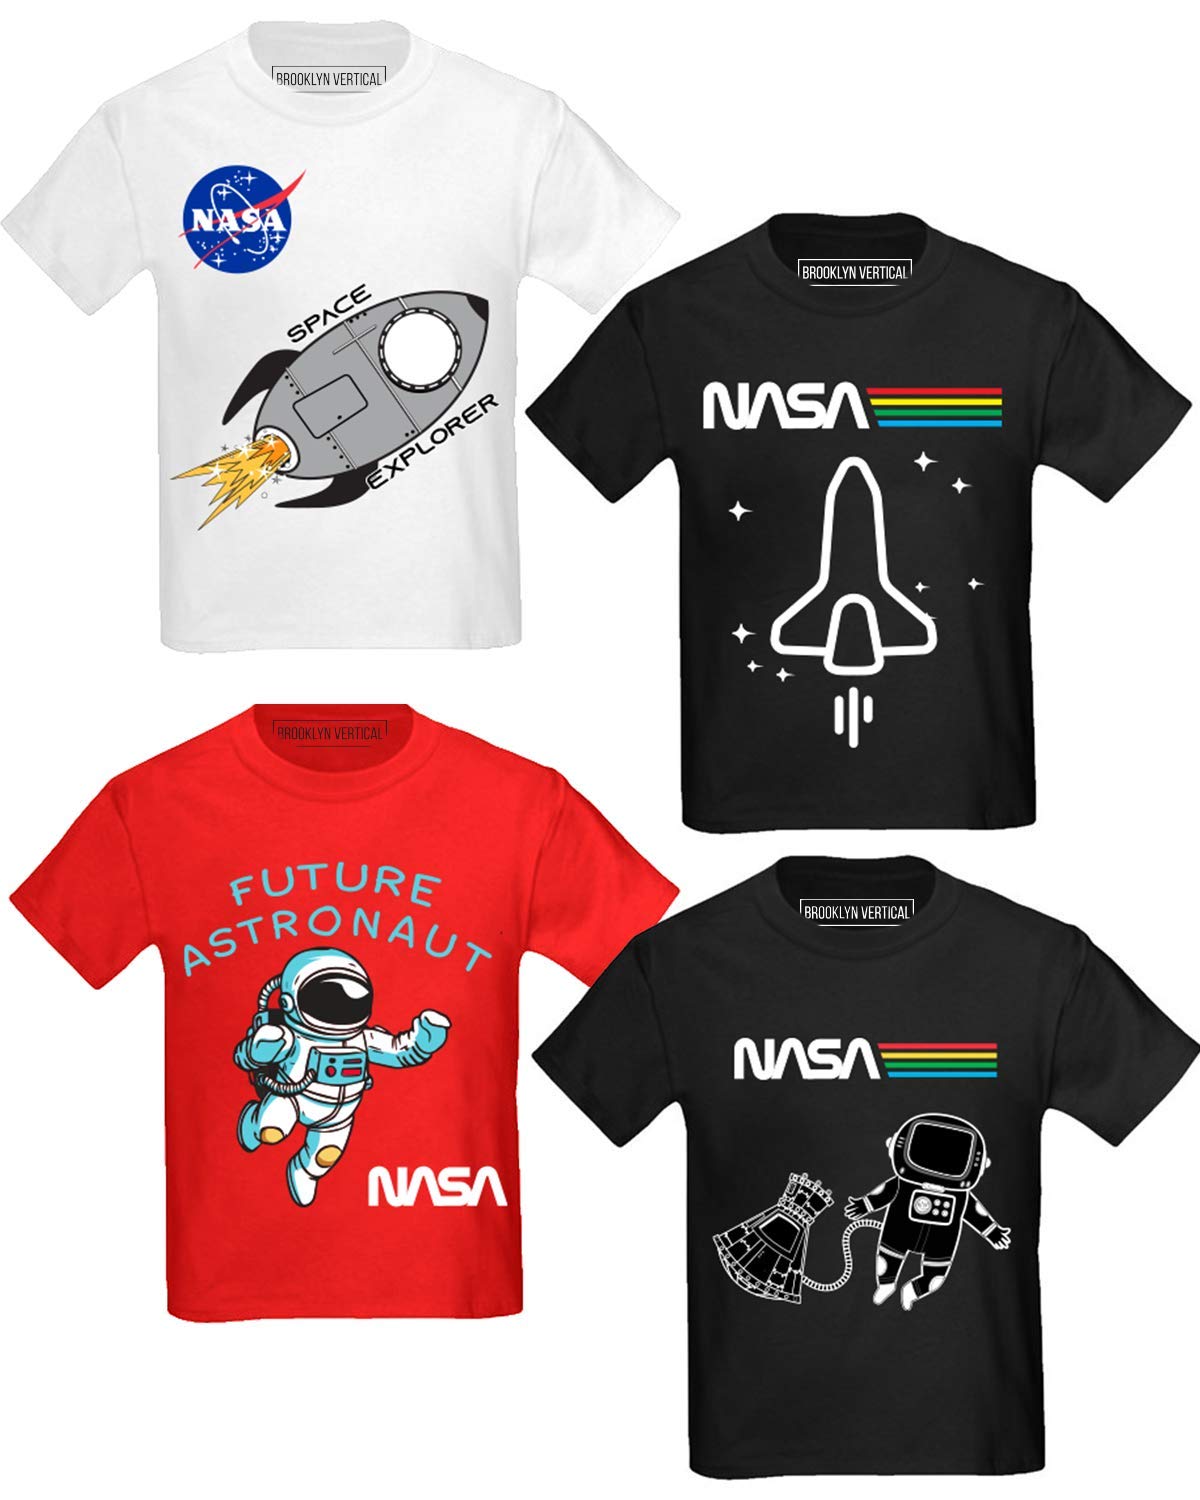 4-Pack Toddler NASA Print Outer Space Rocket Ship Short Sleeve T-Shirt | Soft Cotton Sizes 2T-4T